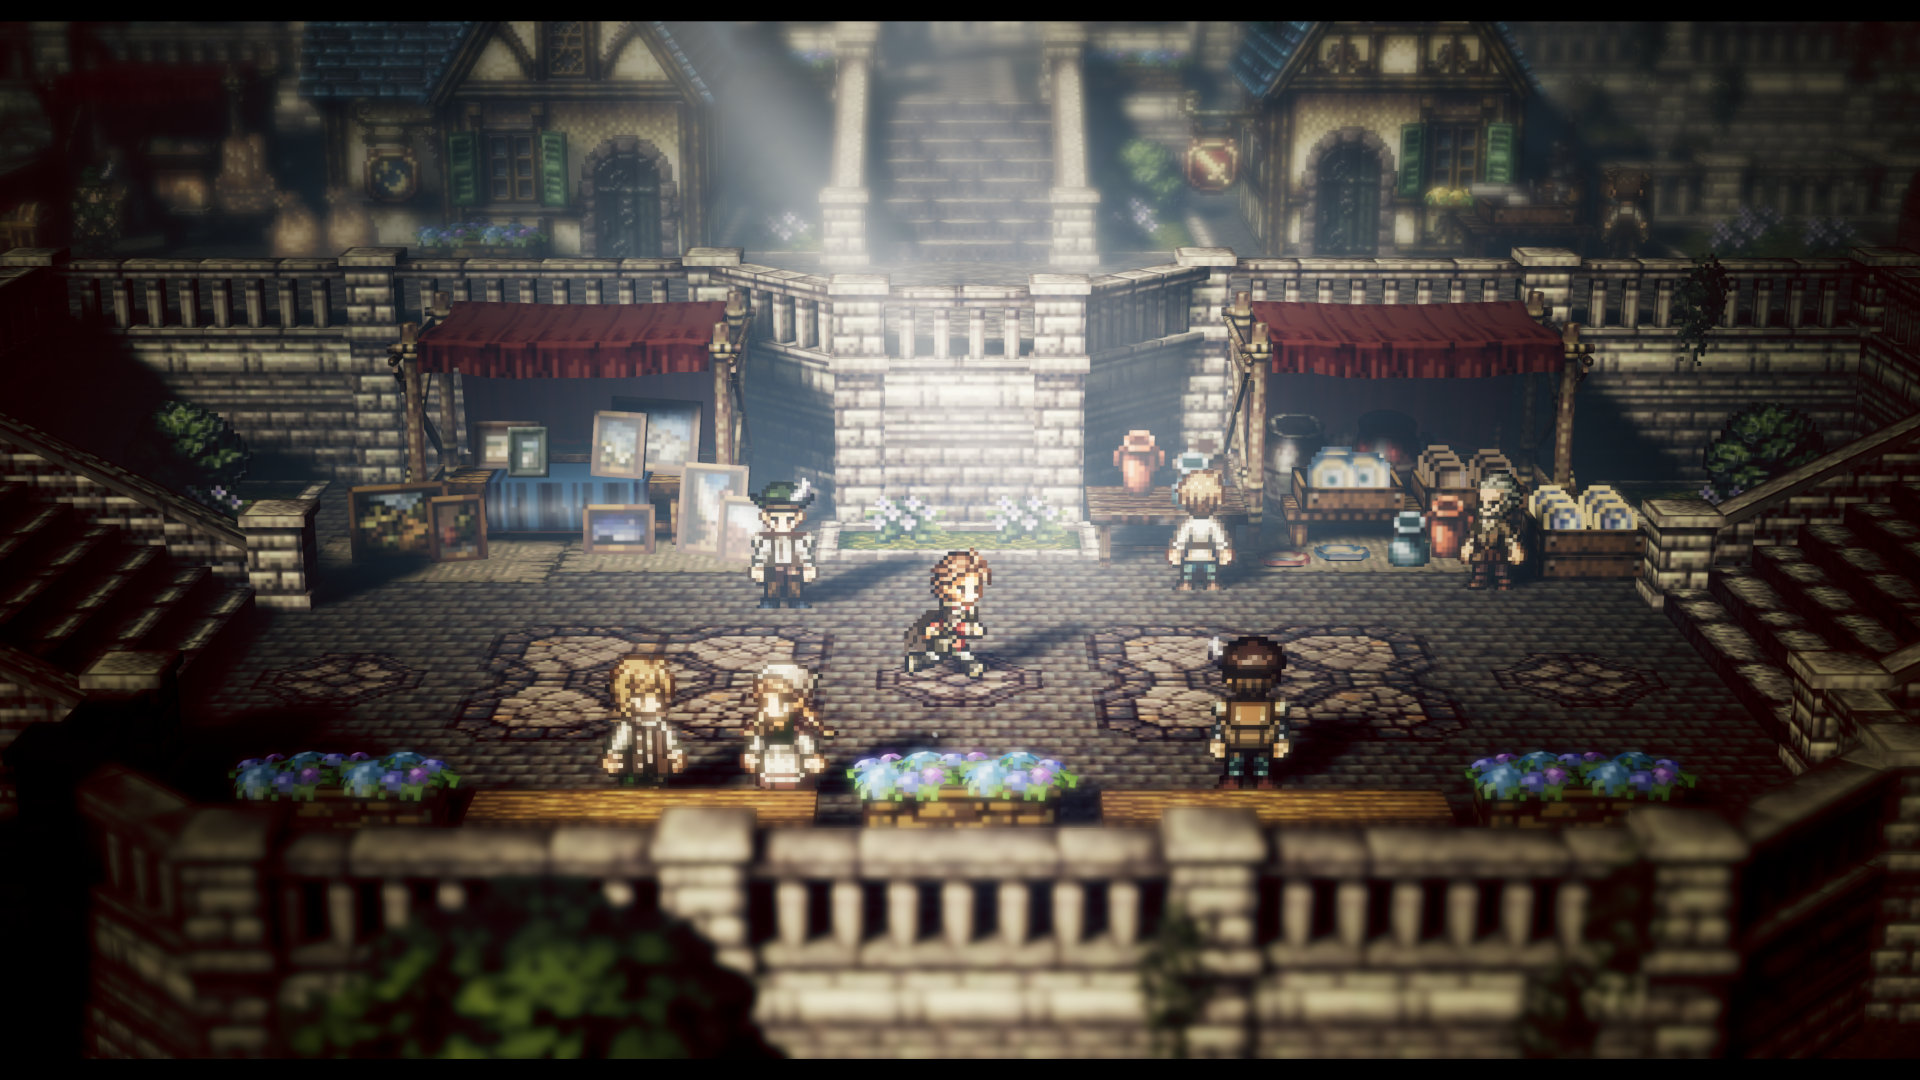 Octopath Traveler: Champions of the Continent for Android